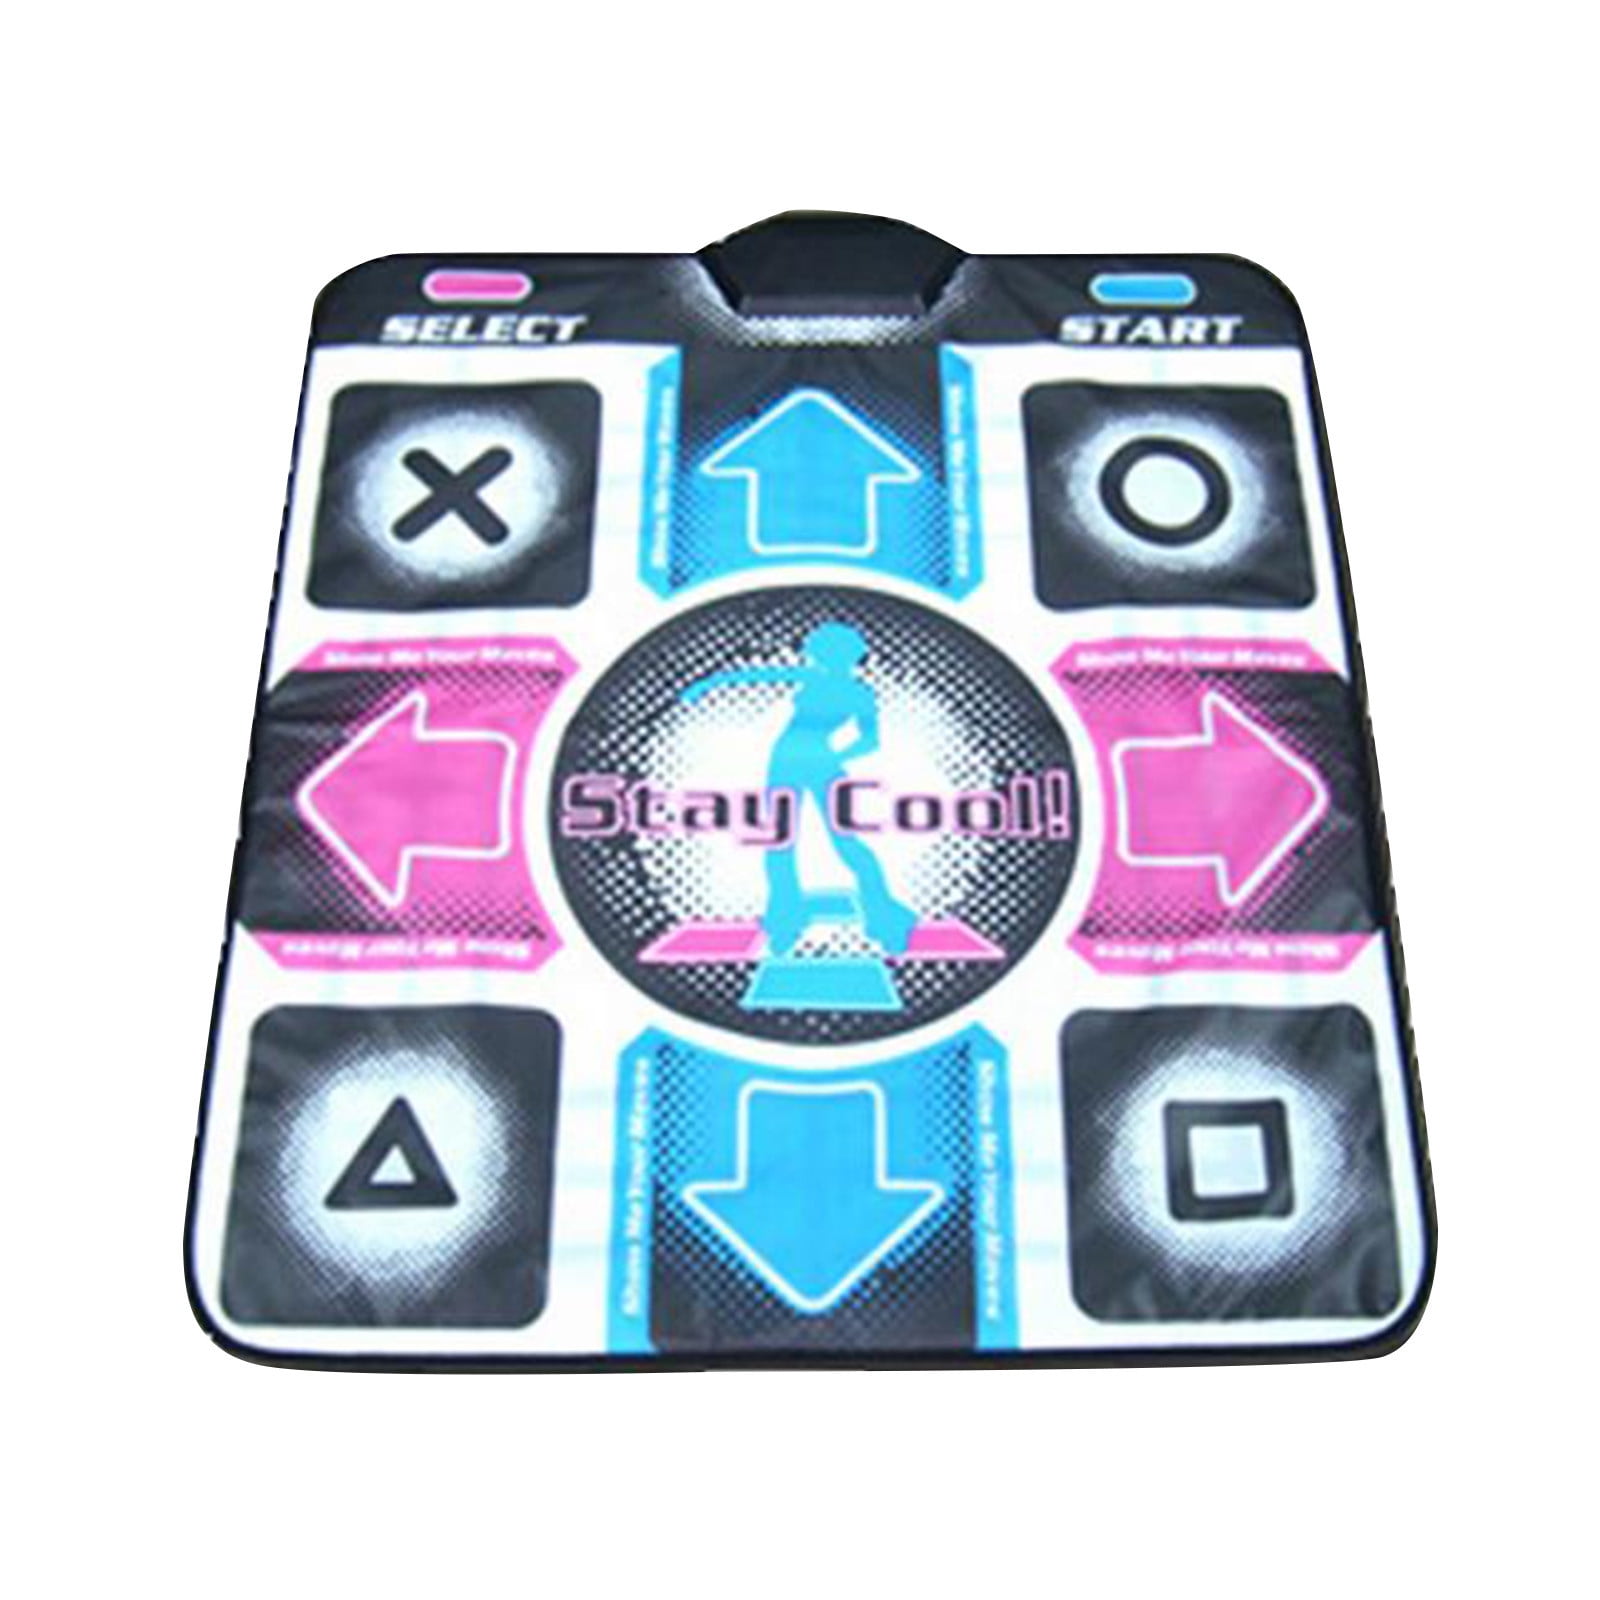 Double User Dance Mat for Kids Adults Sense Game Yoga Game Blanket for PC TV Wireless Non-Slip Dancer Step Pads with Remote Control,Plug and Play